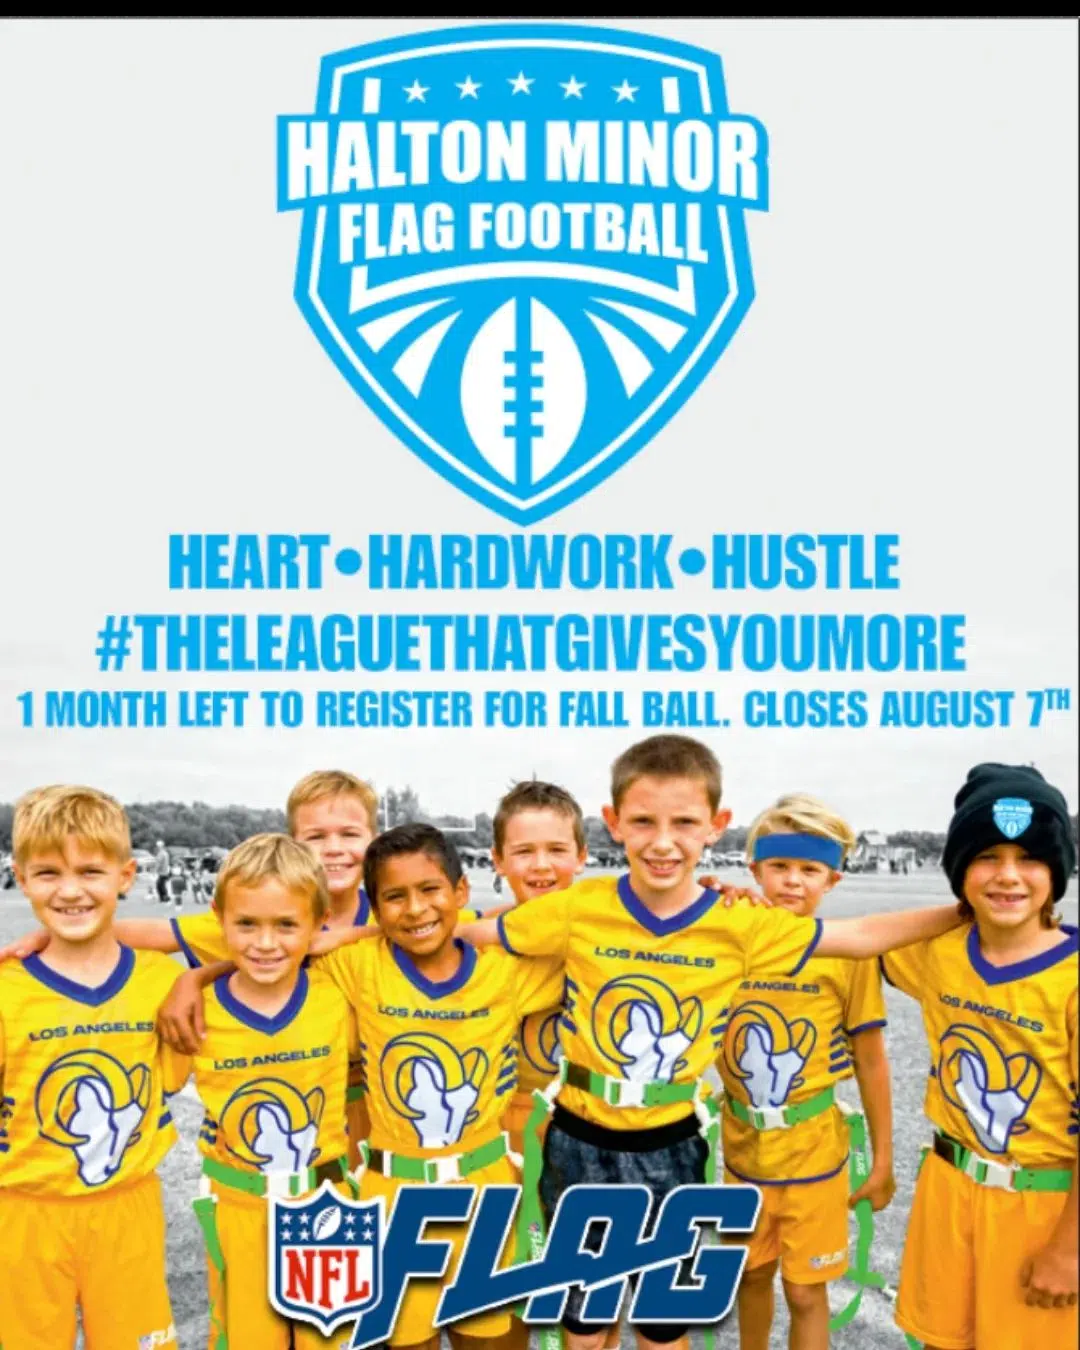 Halton Minor Flag Football is looking for players for the 2022 Fall season